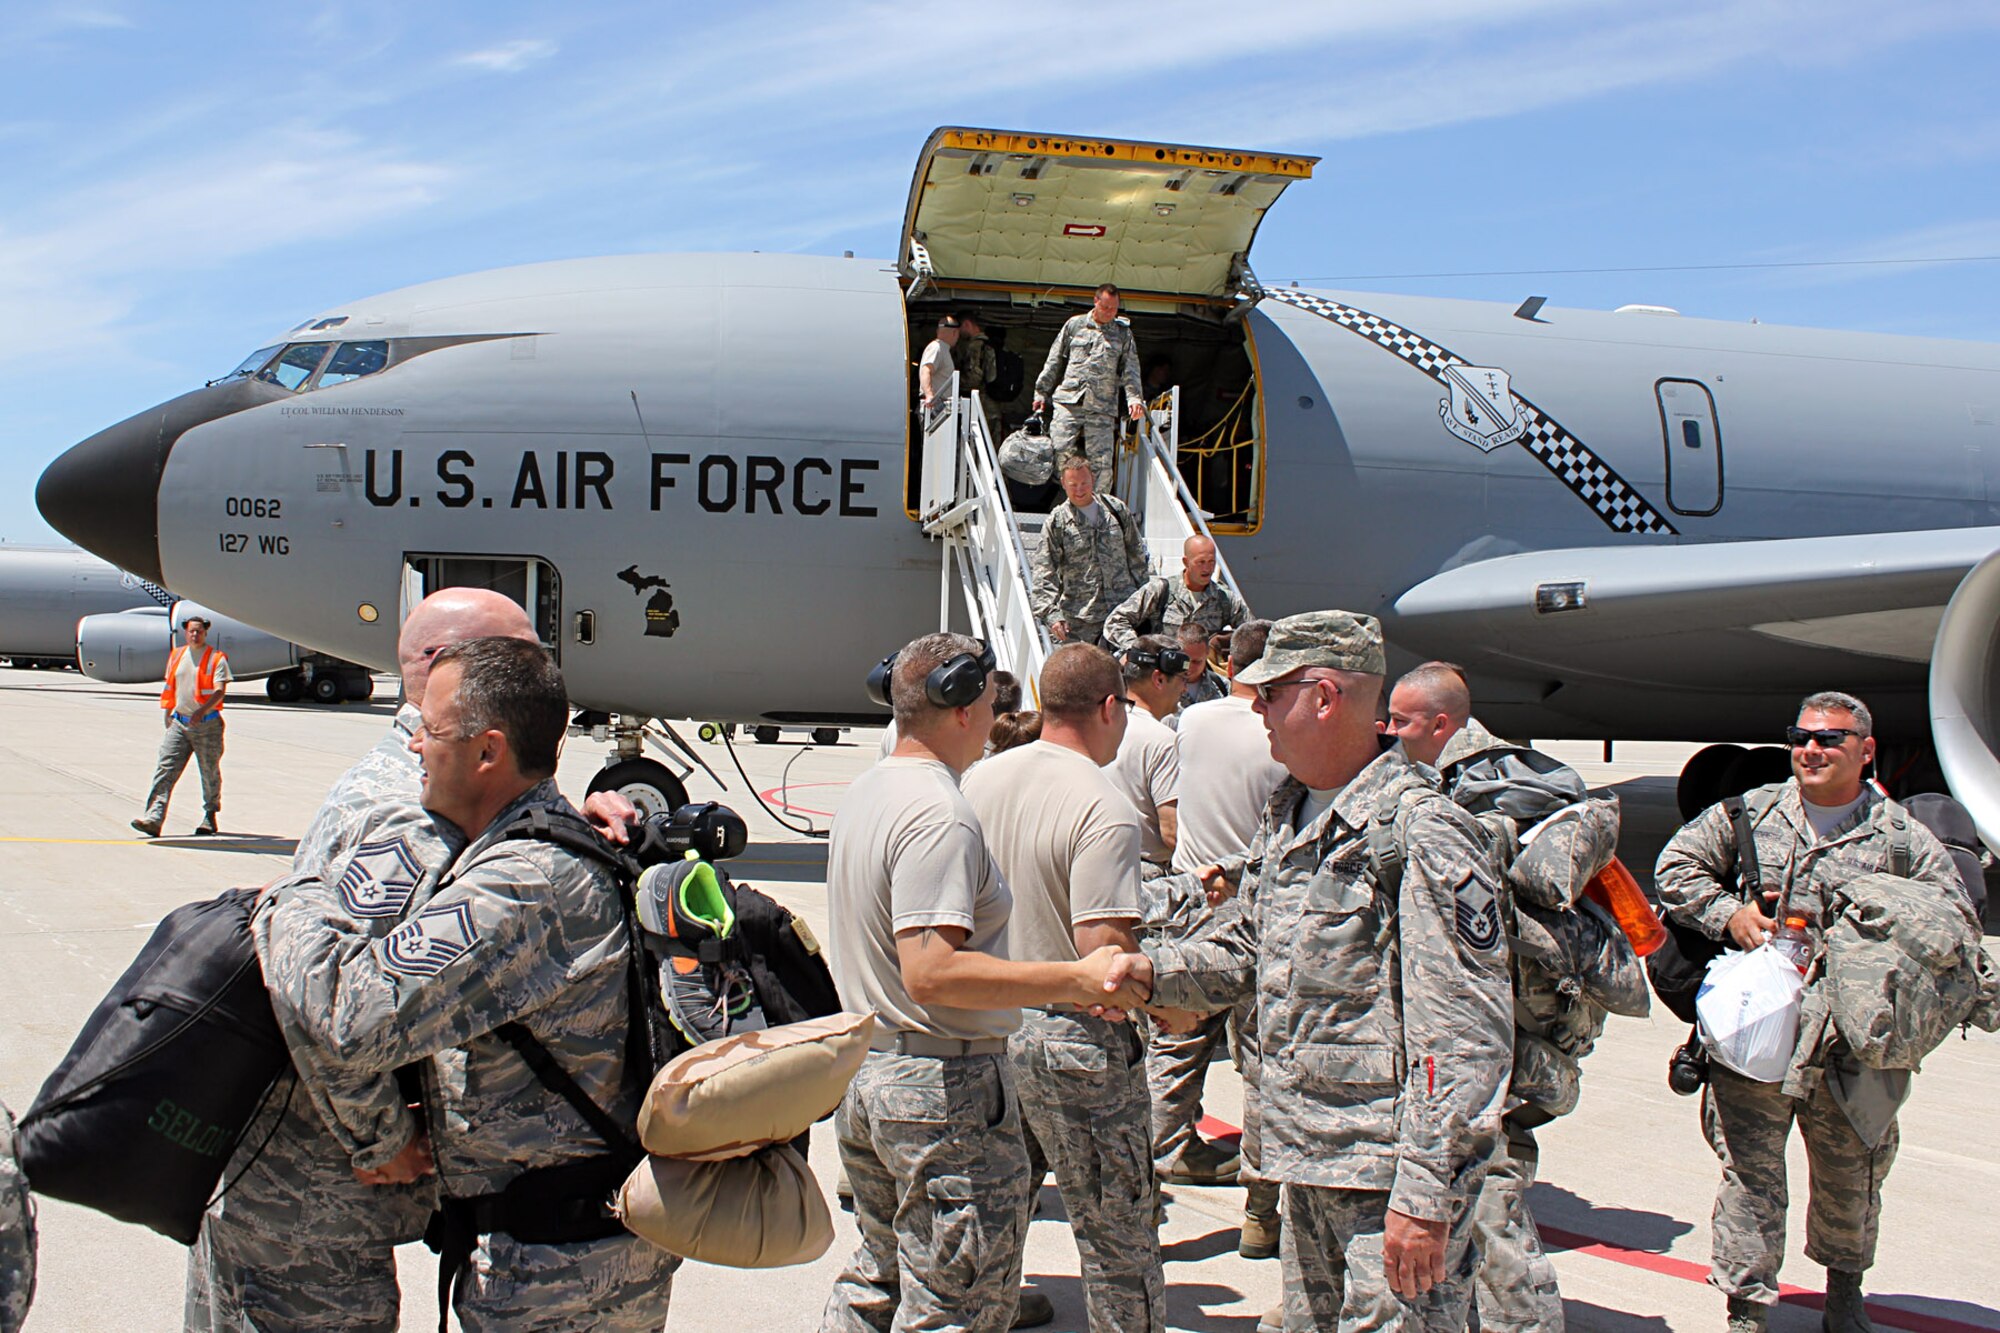 140609-Z-VA676-012 - Airmen of the 127th Air Refueling Group return to their home station of Selfridge AirNational Guard Base, Mich., June 9, 2014, after a deployment to southwest Asia and the Central Command Area of Responsibility. The deployment for the 127th ARG was the last of a three-year-long series of "rolling mobilizations" during which small groups of Selfridge Airmen -- and often one or two KC-135s -- were forward deployed on an ongoing basis. With the conclusion of the rolling mobilizations, the 127th ARG will return to a more traditional Air Expeditionary Force schedule for possible future deployments, meaning more members of the unit will likely deploy if called upon, but will likely deploy less often. (U.S. Air National Guard photo by TSgt. Dan Heaton)